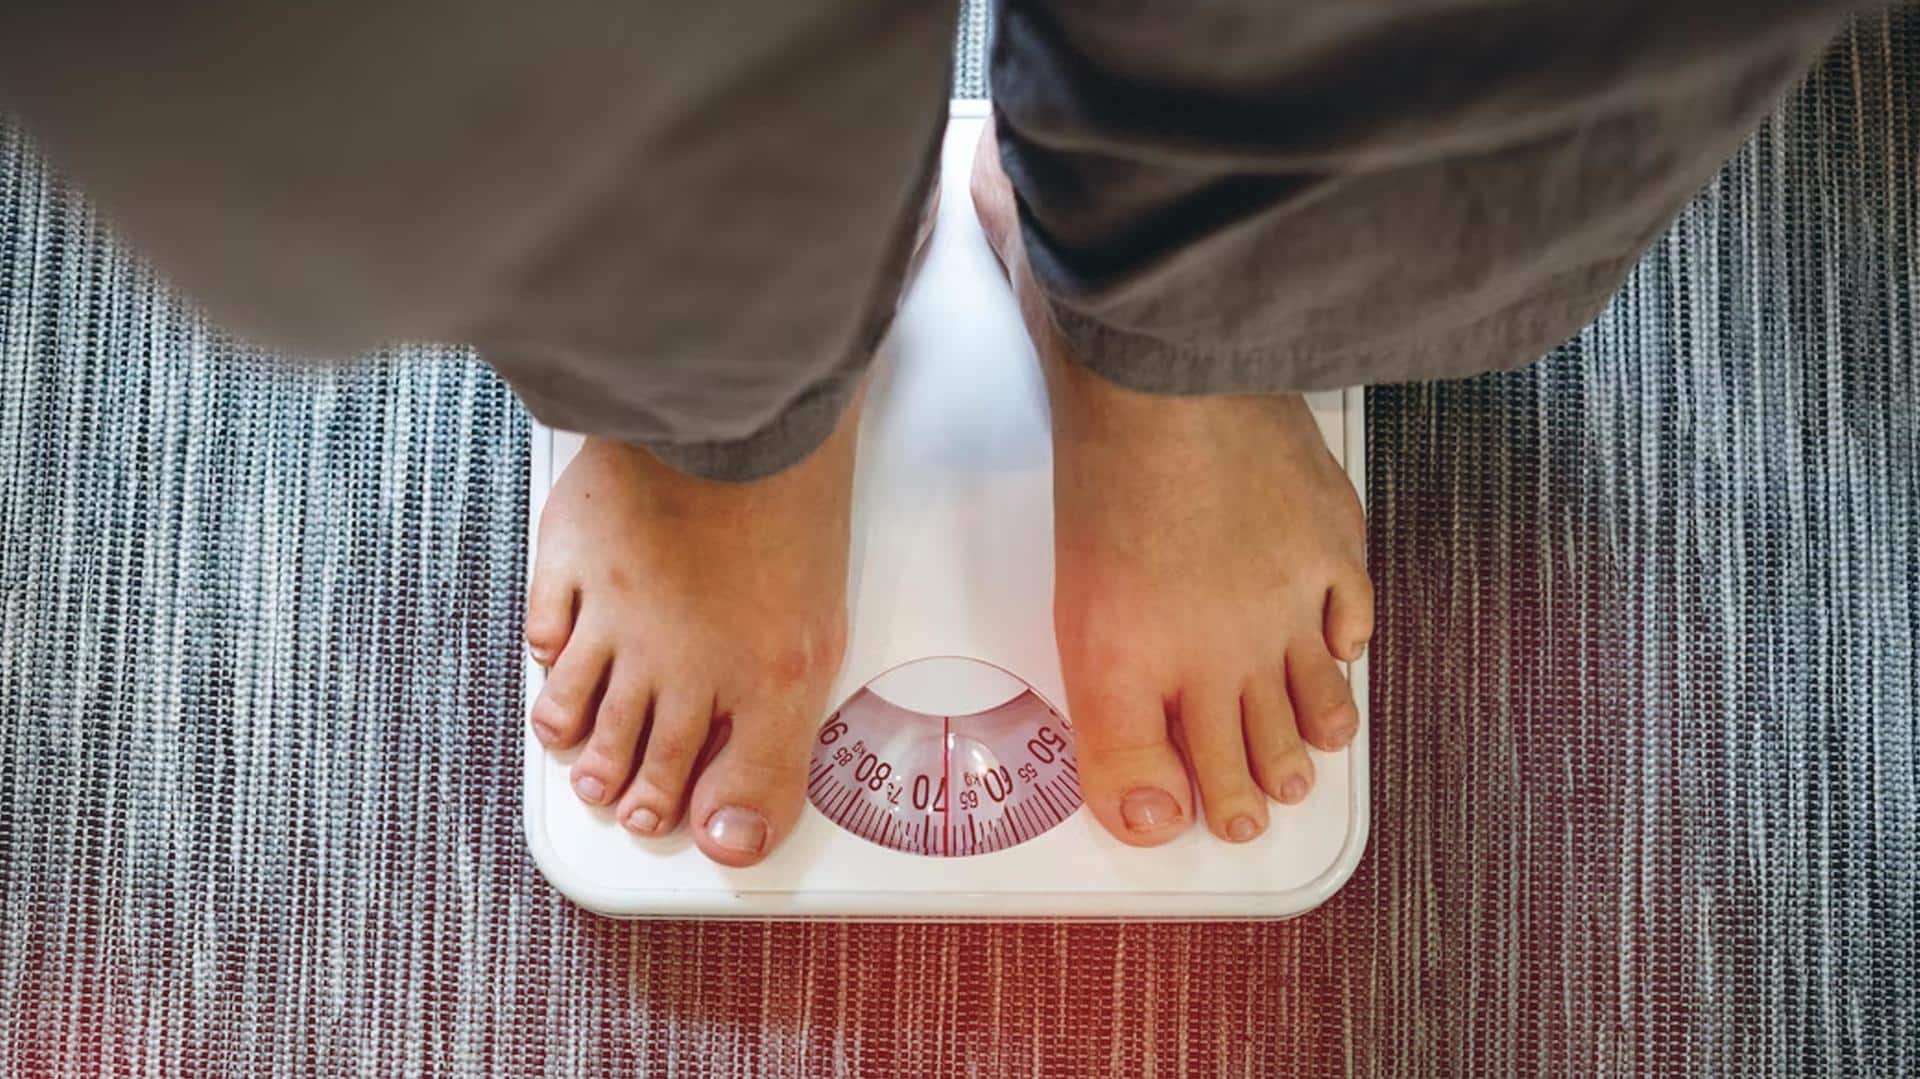 Obesity: Stop judging obese people based on these myths